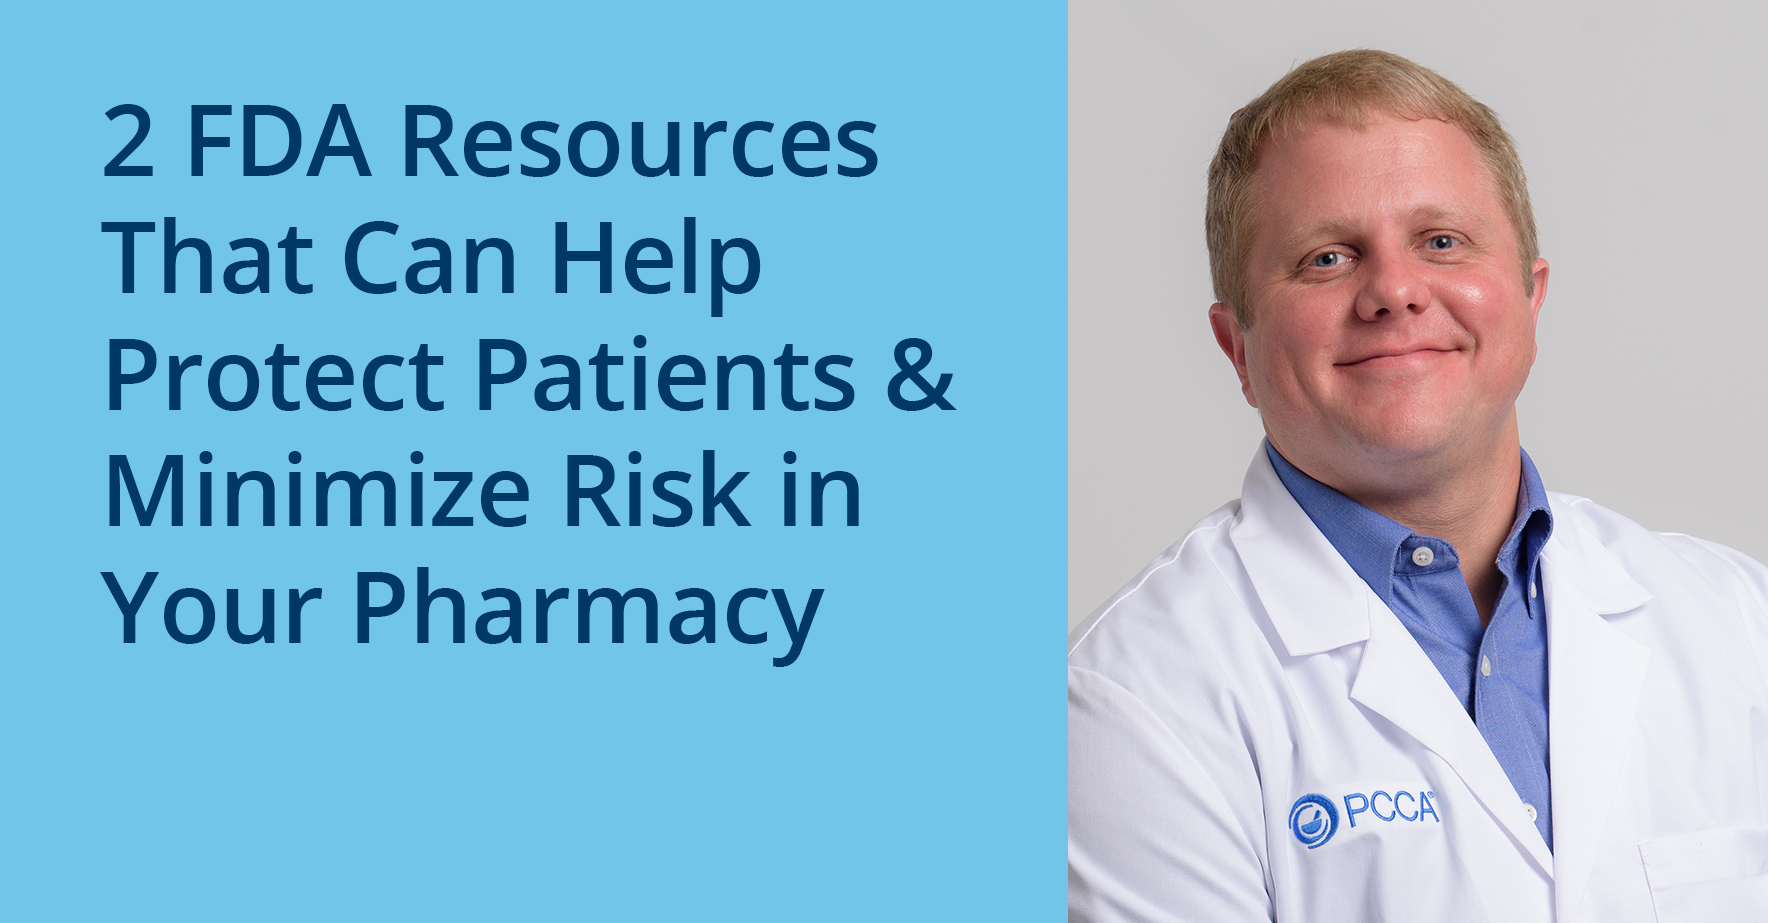 2 _fda_resources_that_can_help_protect_patients_and_minimize_risk_in_your_pharmacy.jpg